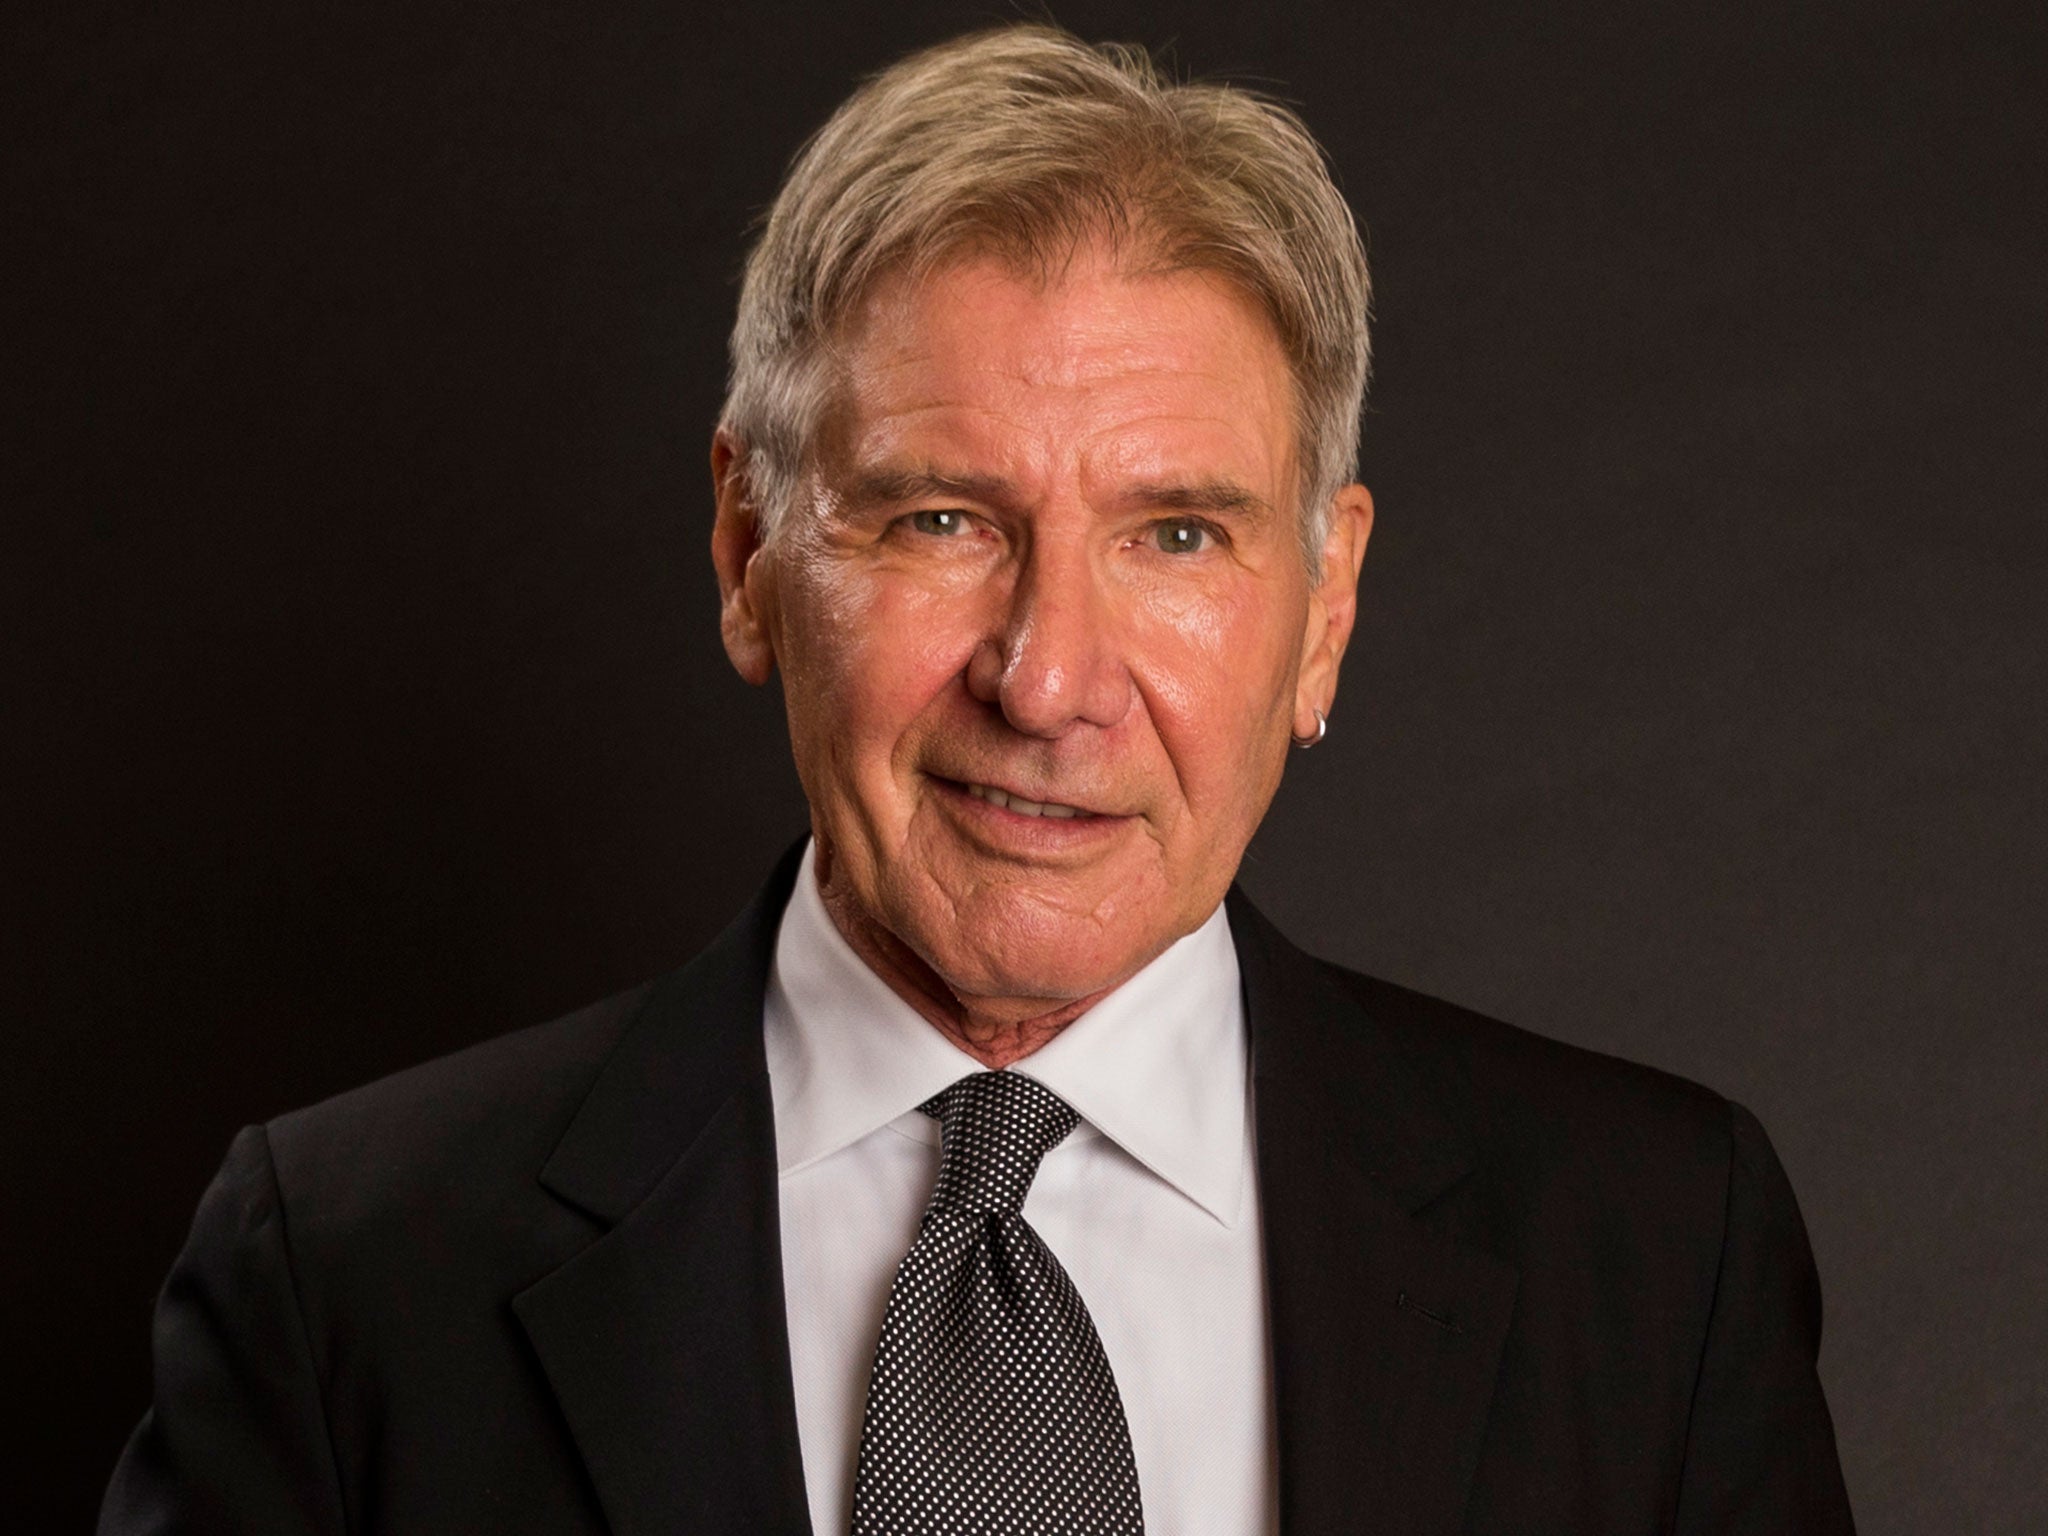 Harrison Ford will play Rick Deckard once again for the Blade Runner sequel